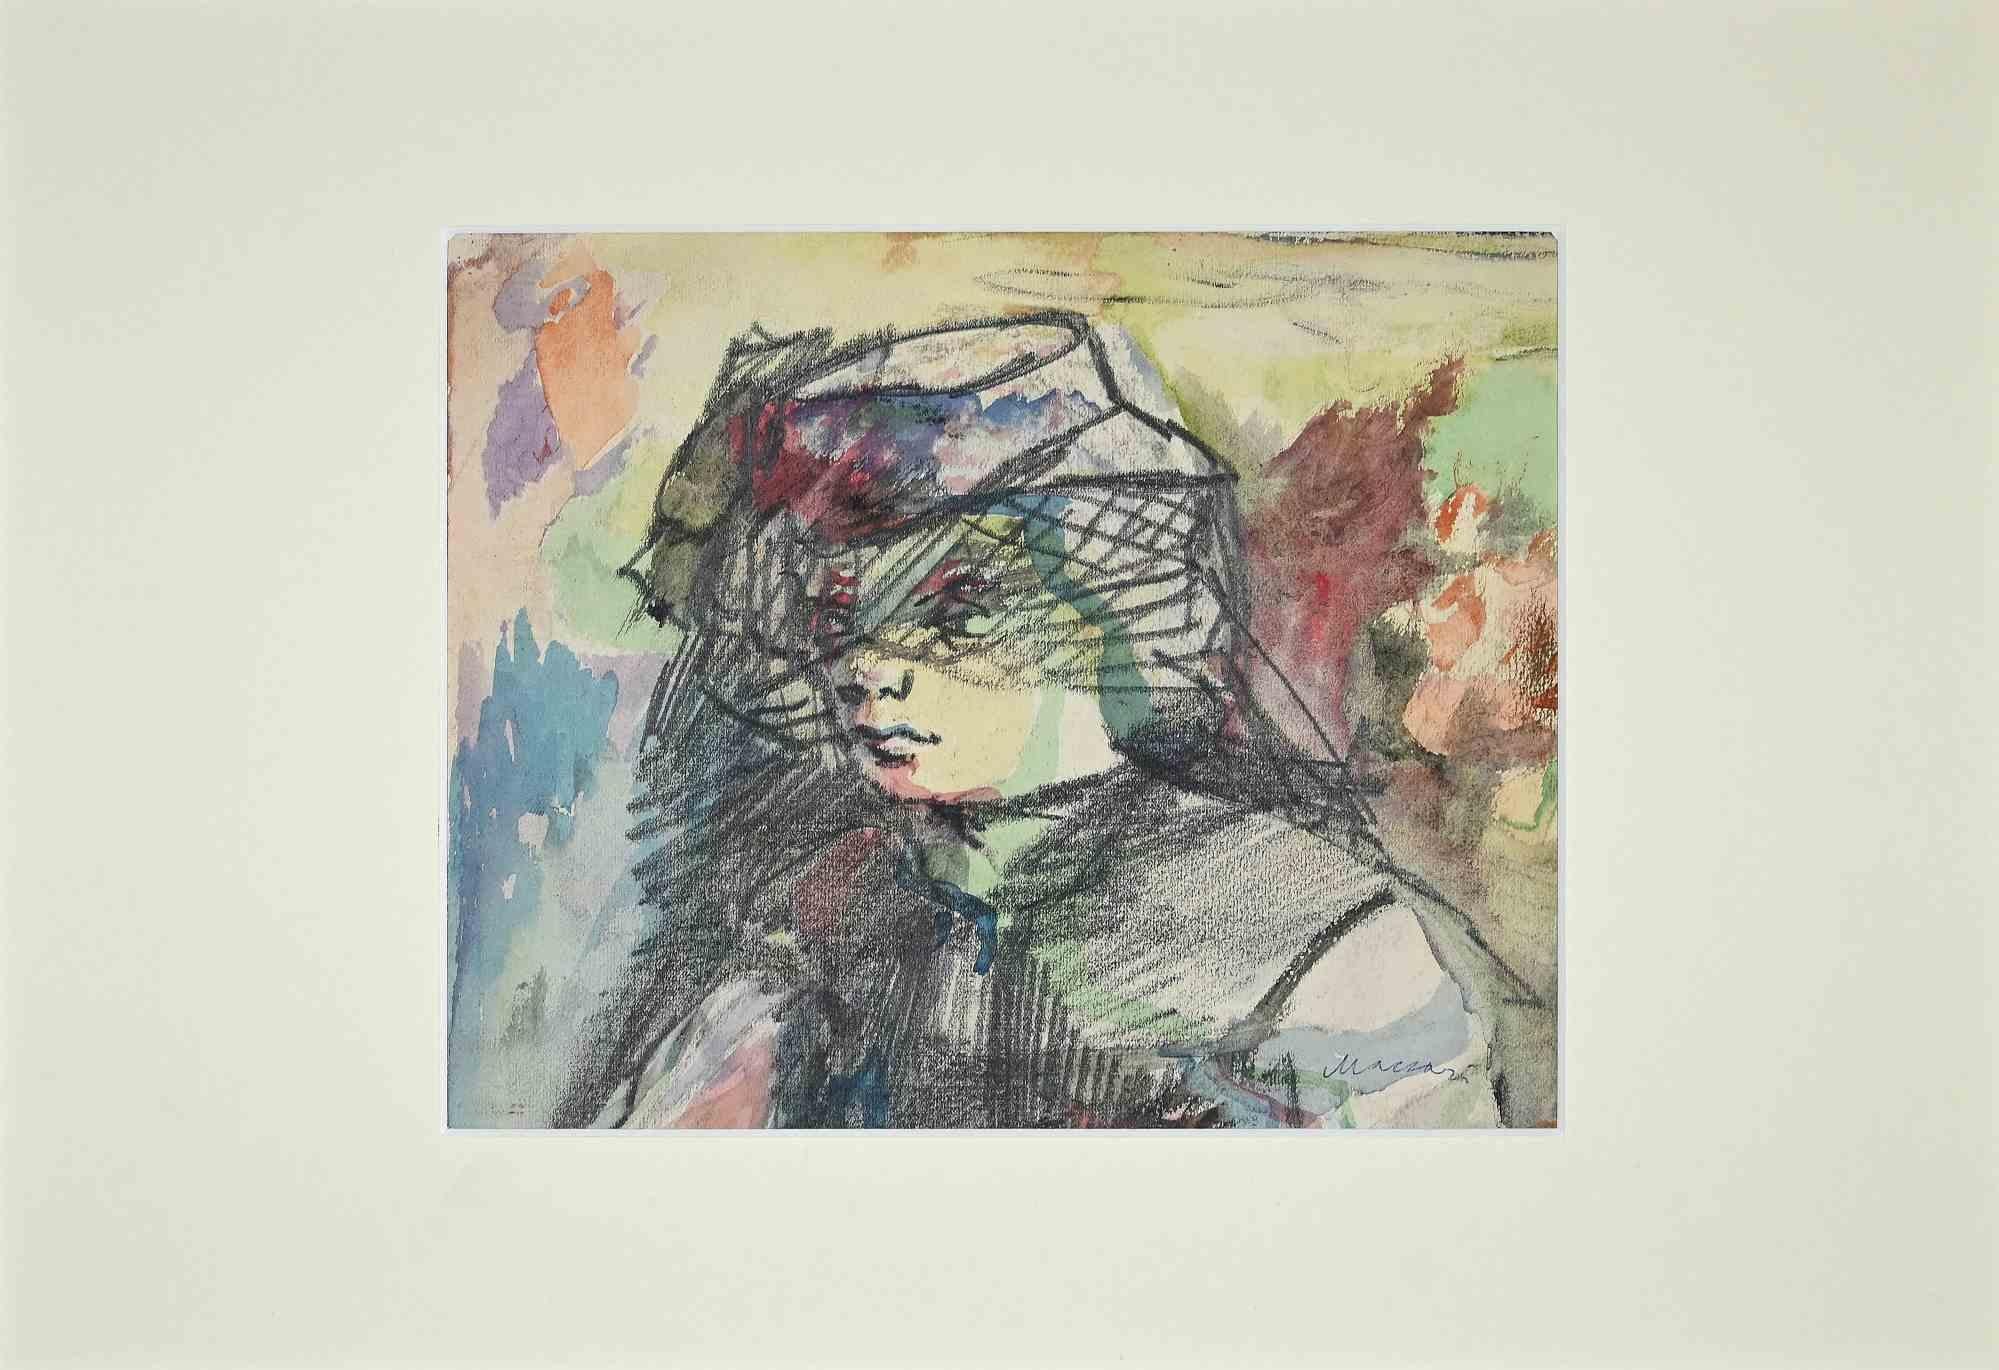 Portrait of Woman is an original Charcoal and Watercolor on paper realized by Italian artist Mino Maccari in the Mid-20th Century.

Good Conditions.

Hand-signed on the lower right.

The artwork is depicted through strong strokes and harmonious